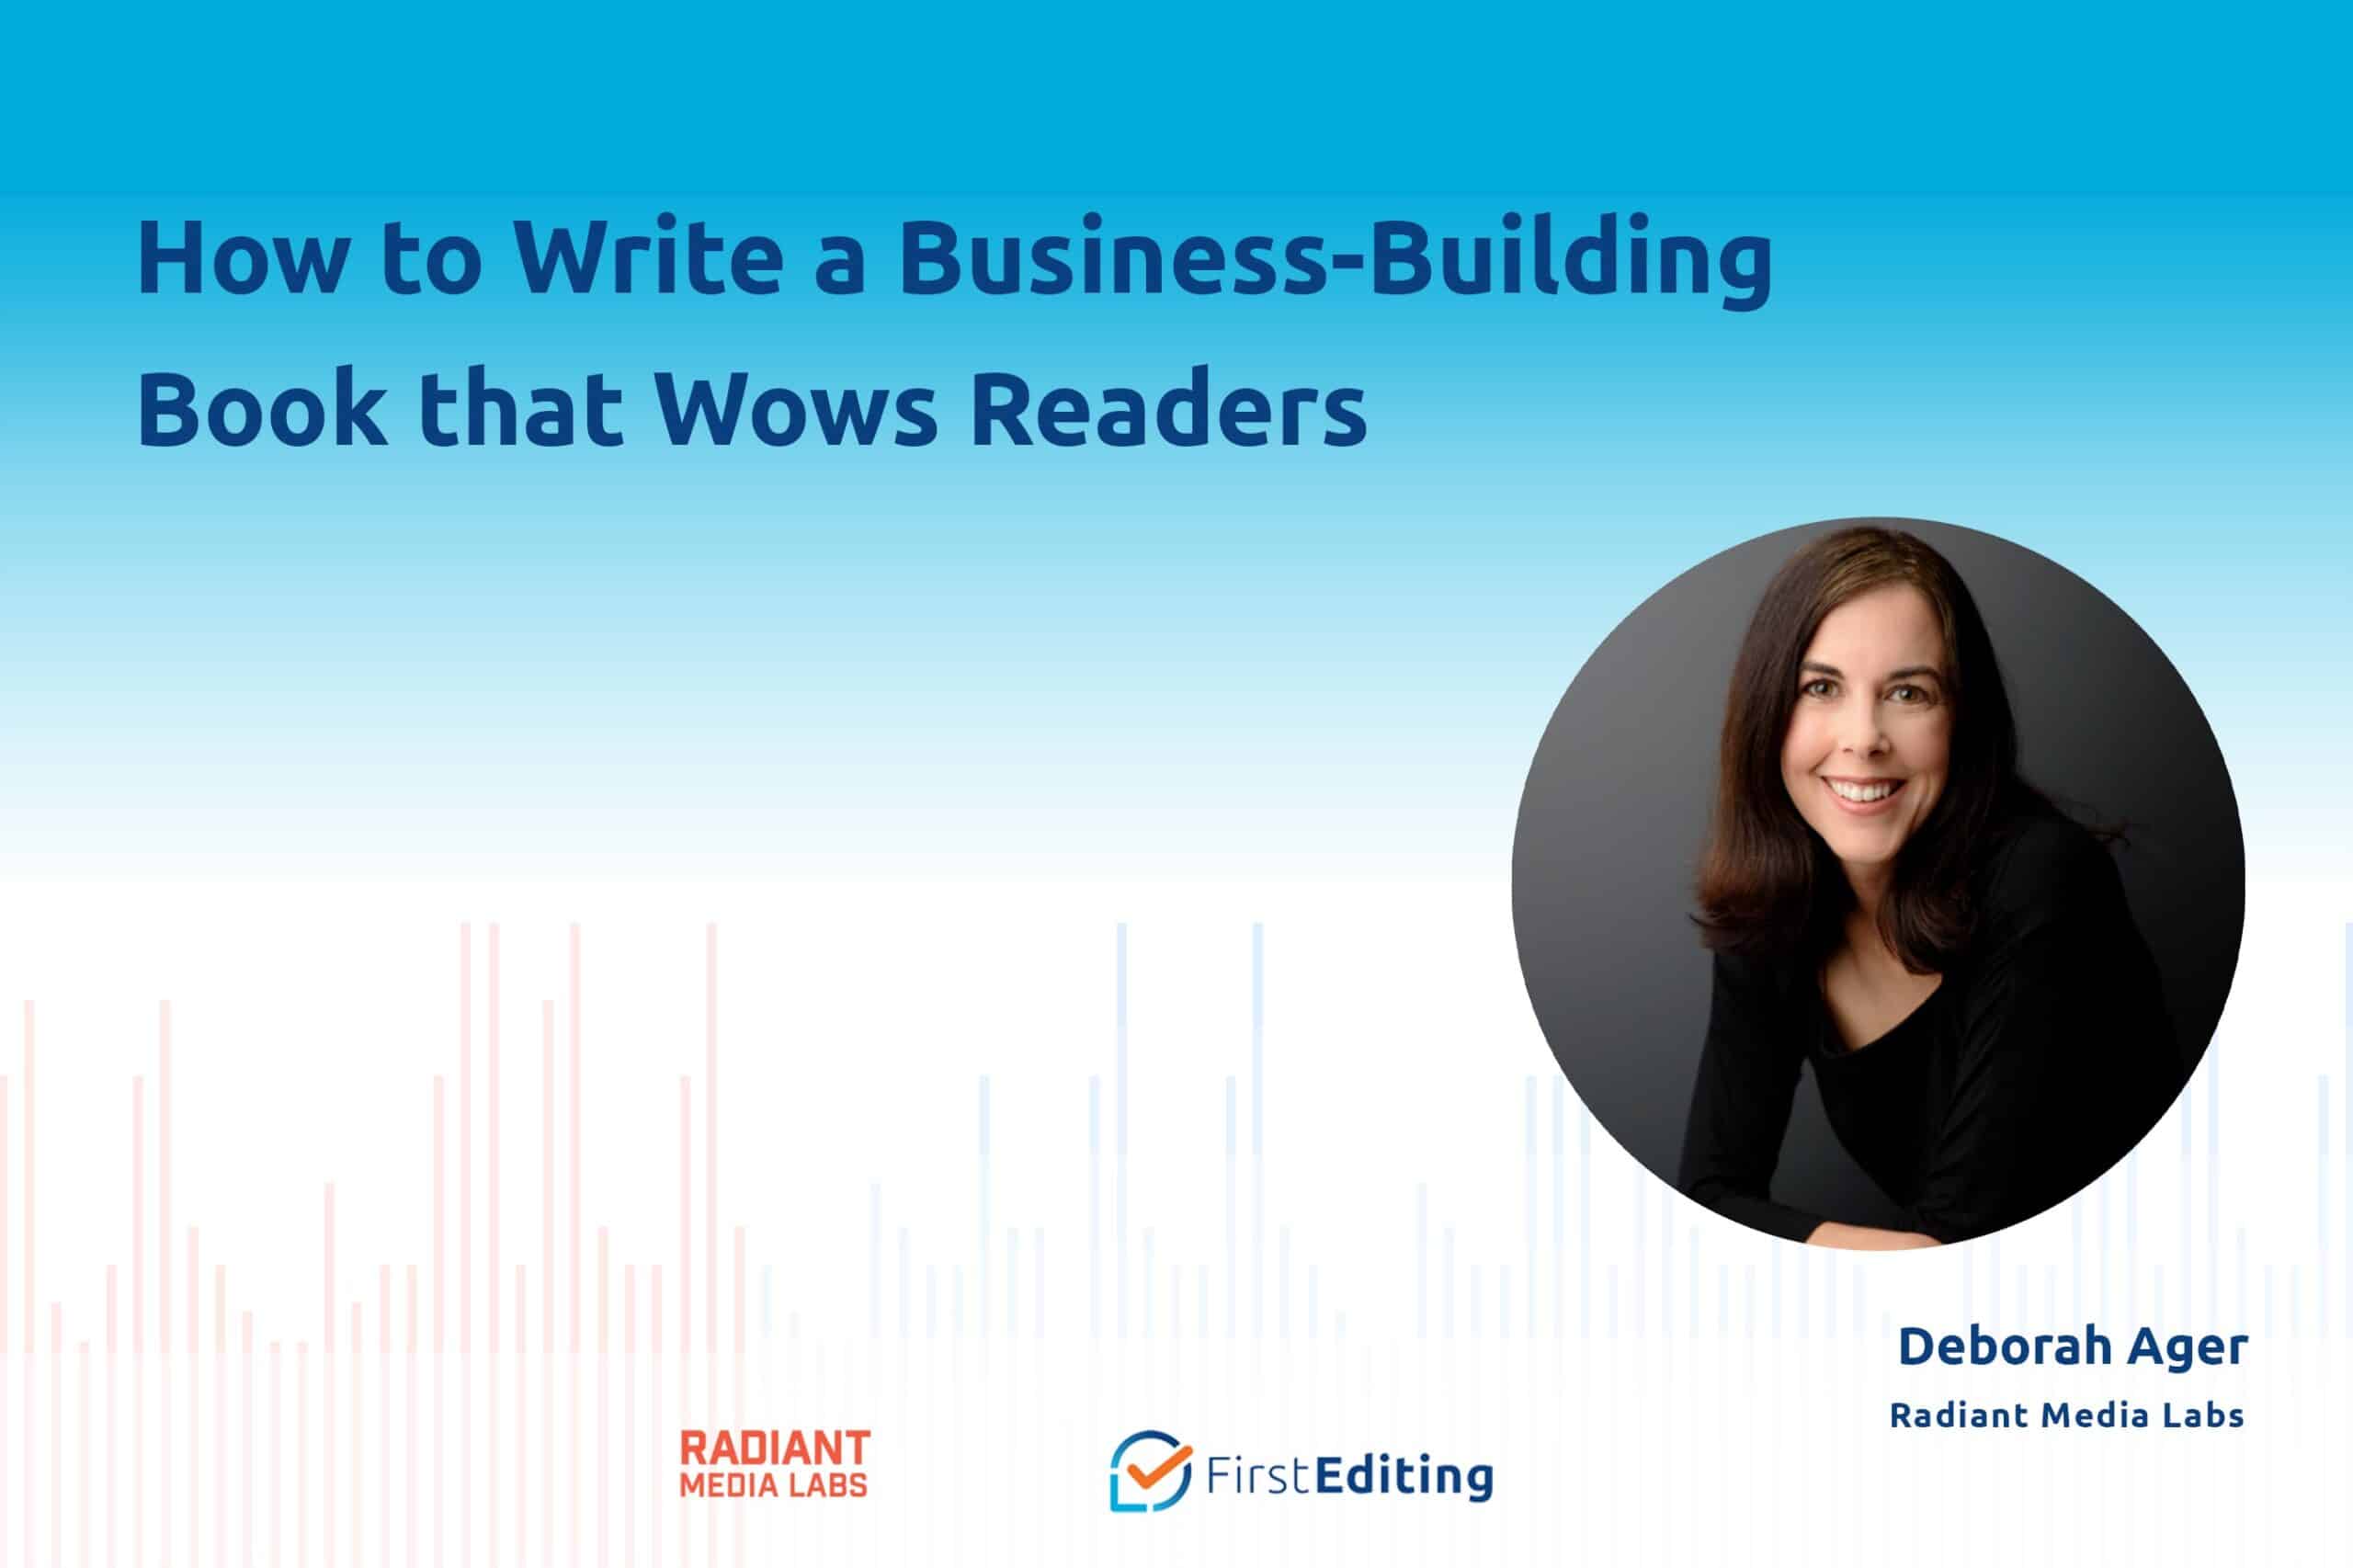 How to Write a Business-Building Book That Wows Readers with Deborah Ager